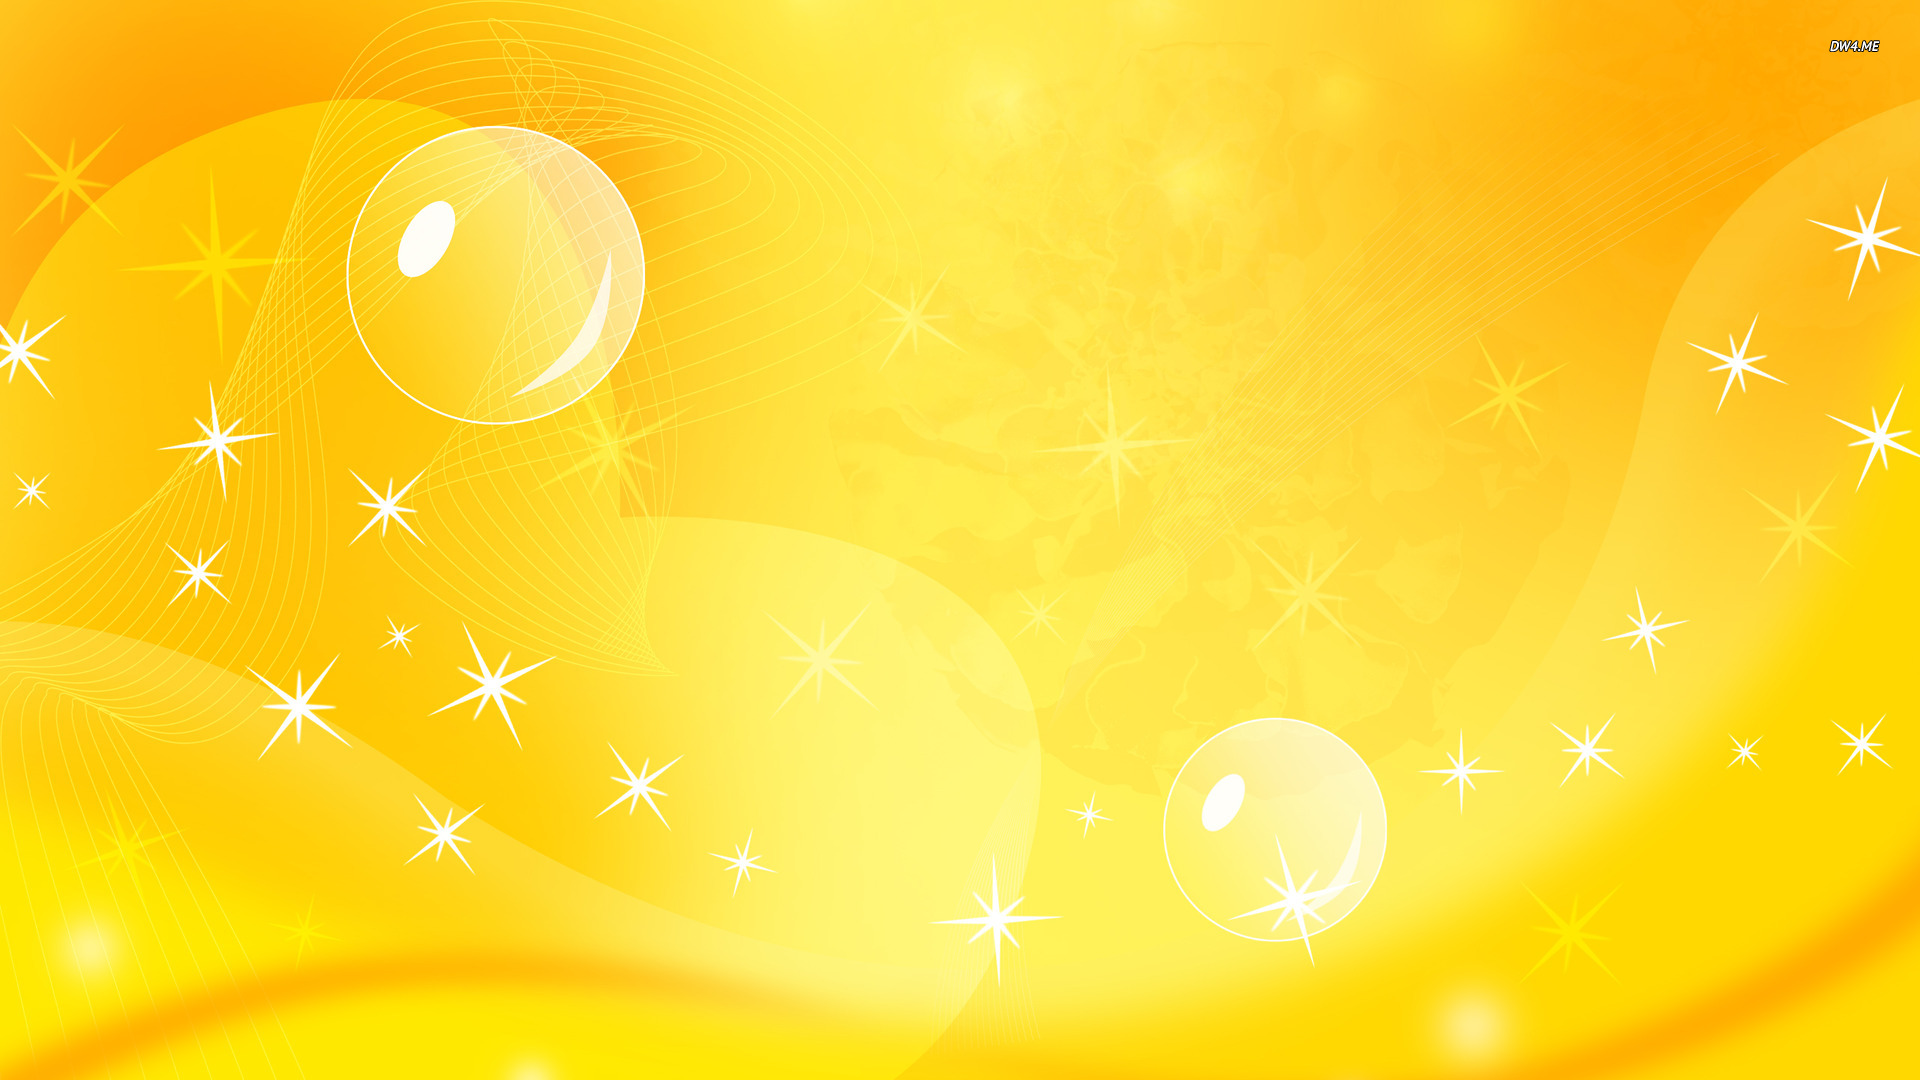  Yellow Wallpaper Sparknotes 1 High Resolution Wallpaper Full Size